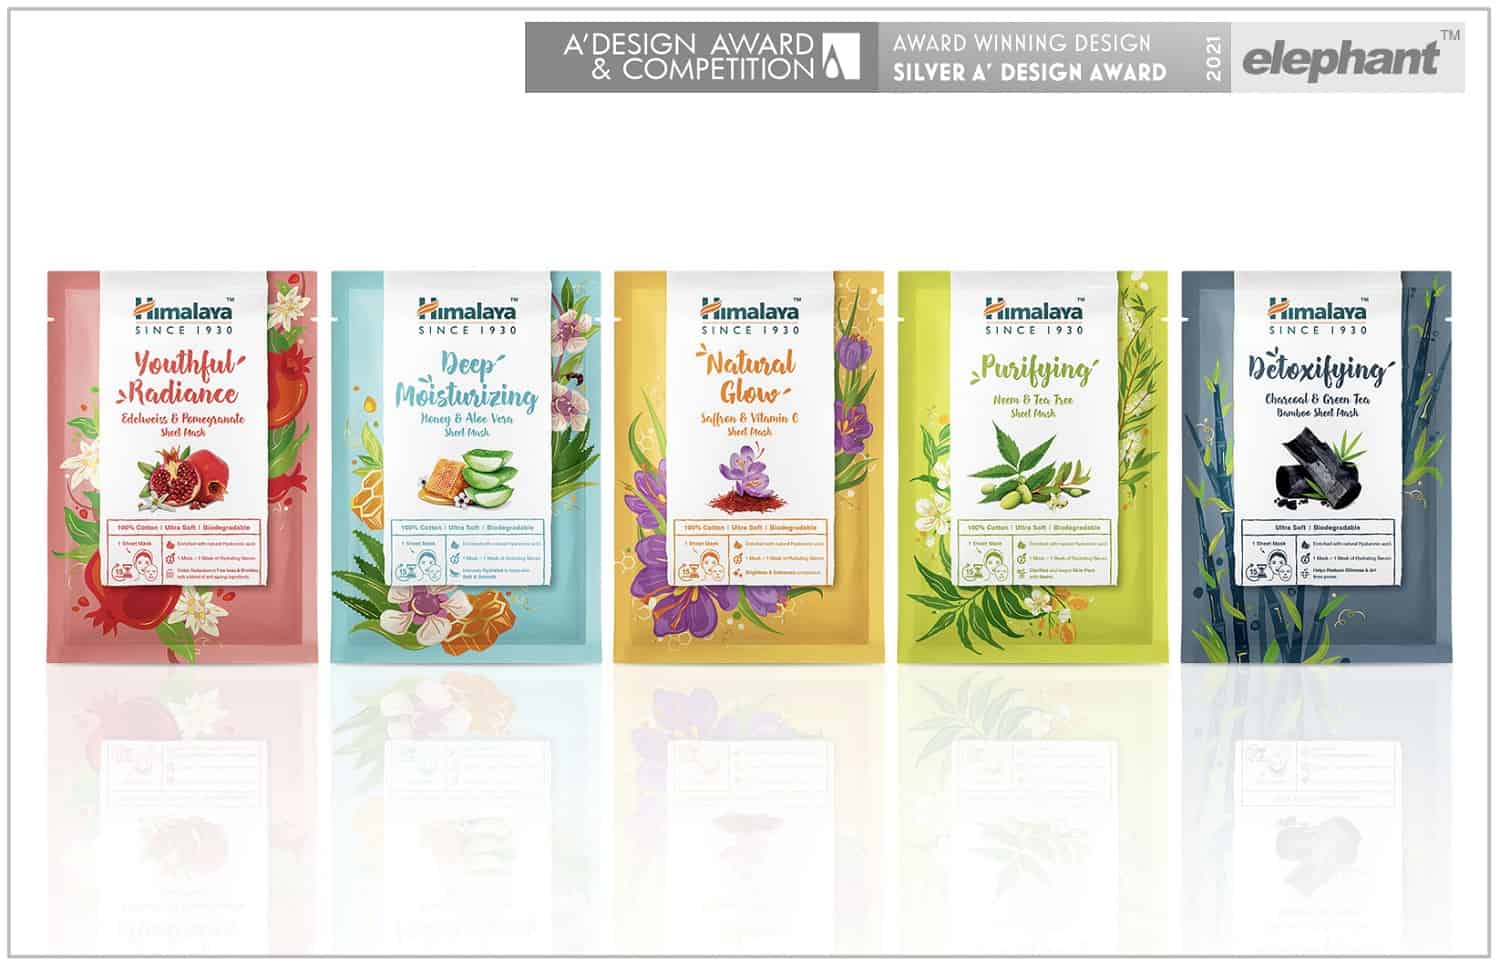 Elephant wins the A’Design Award (Italy)for Himalaya Wellness Packaging Design